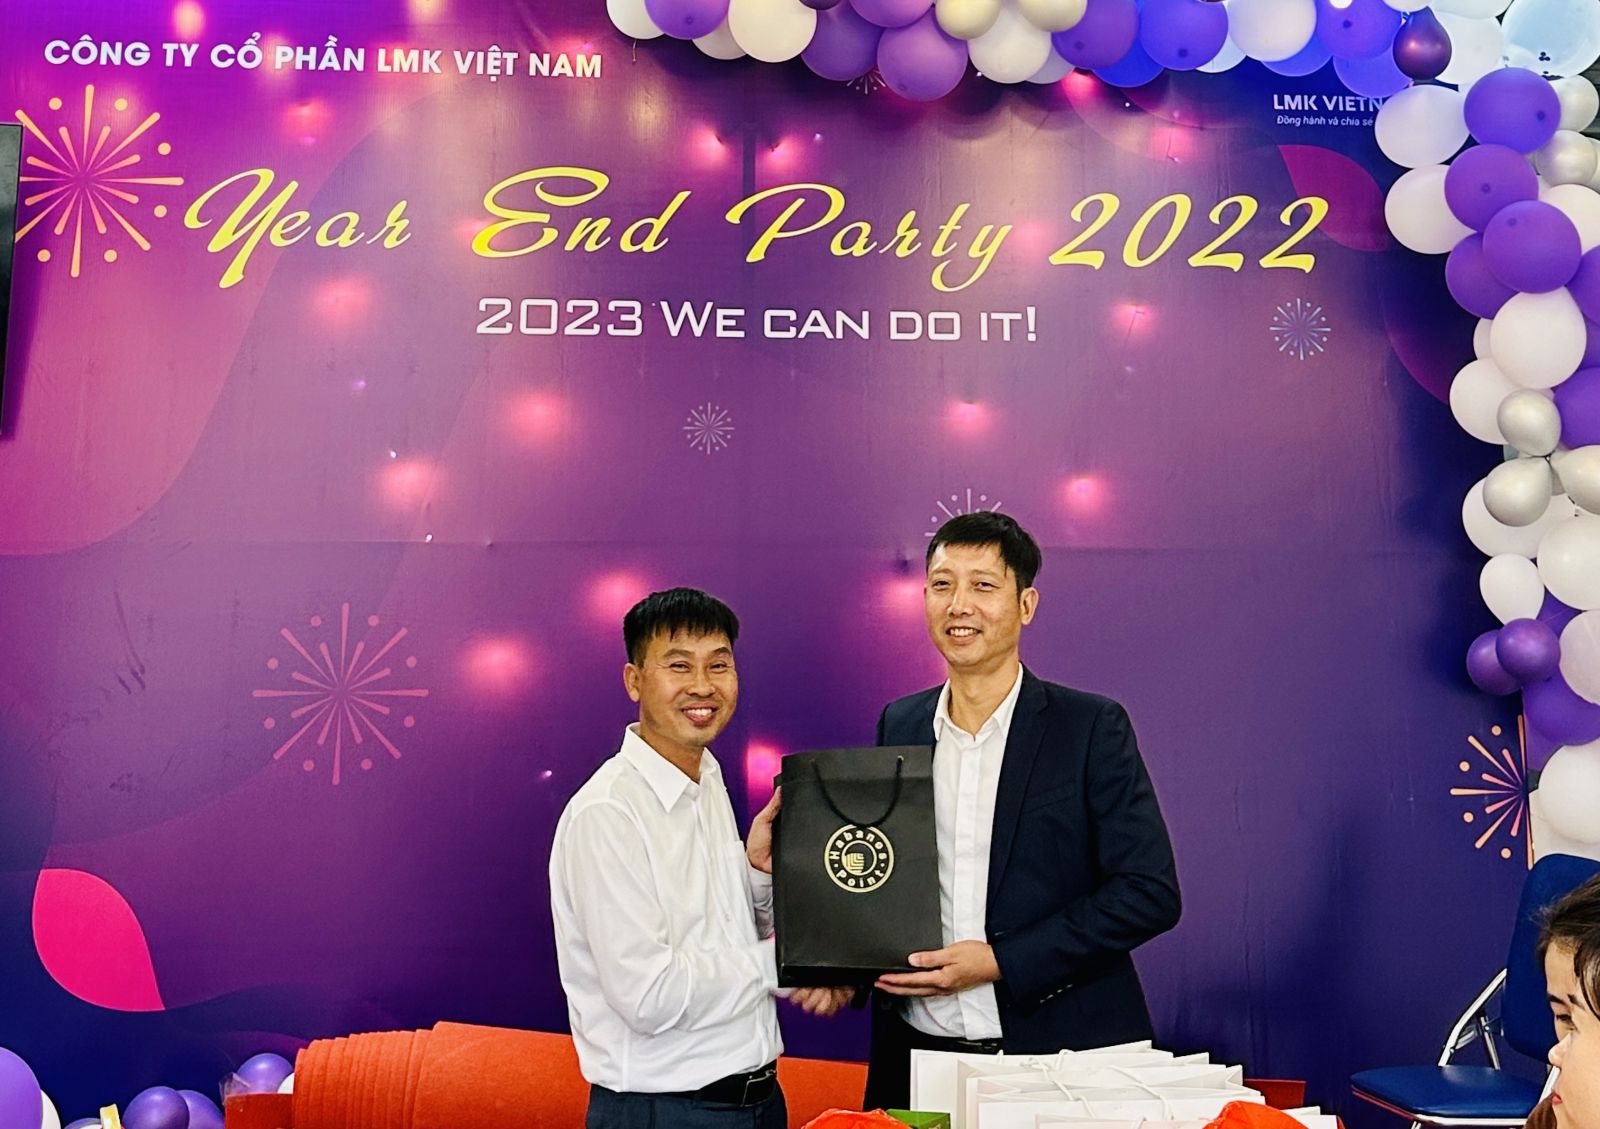 Year end party 2022